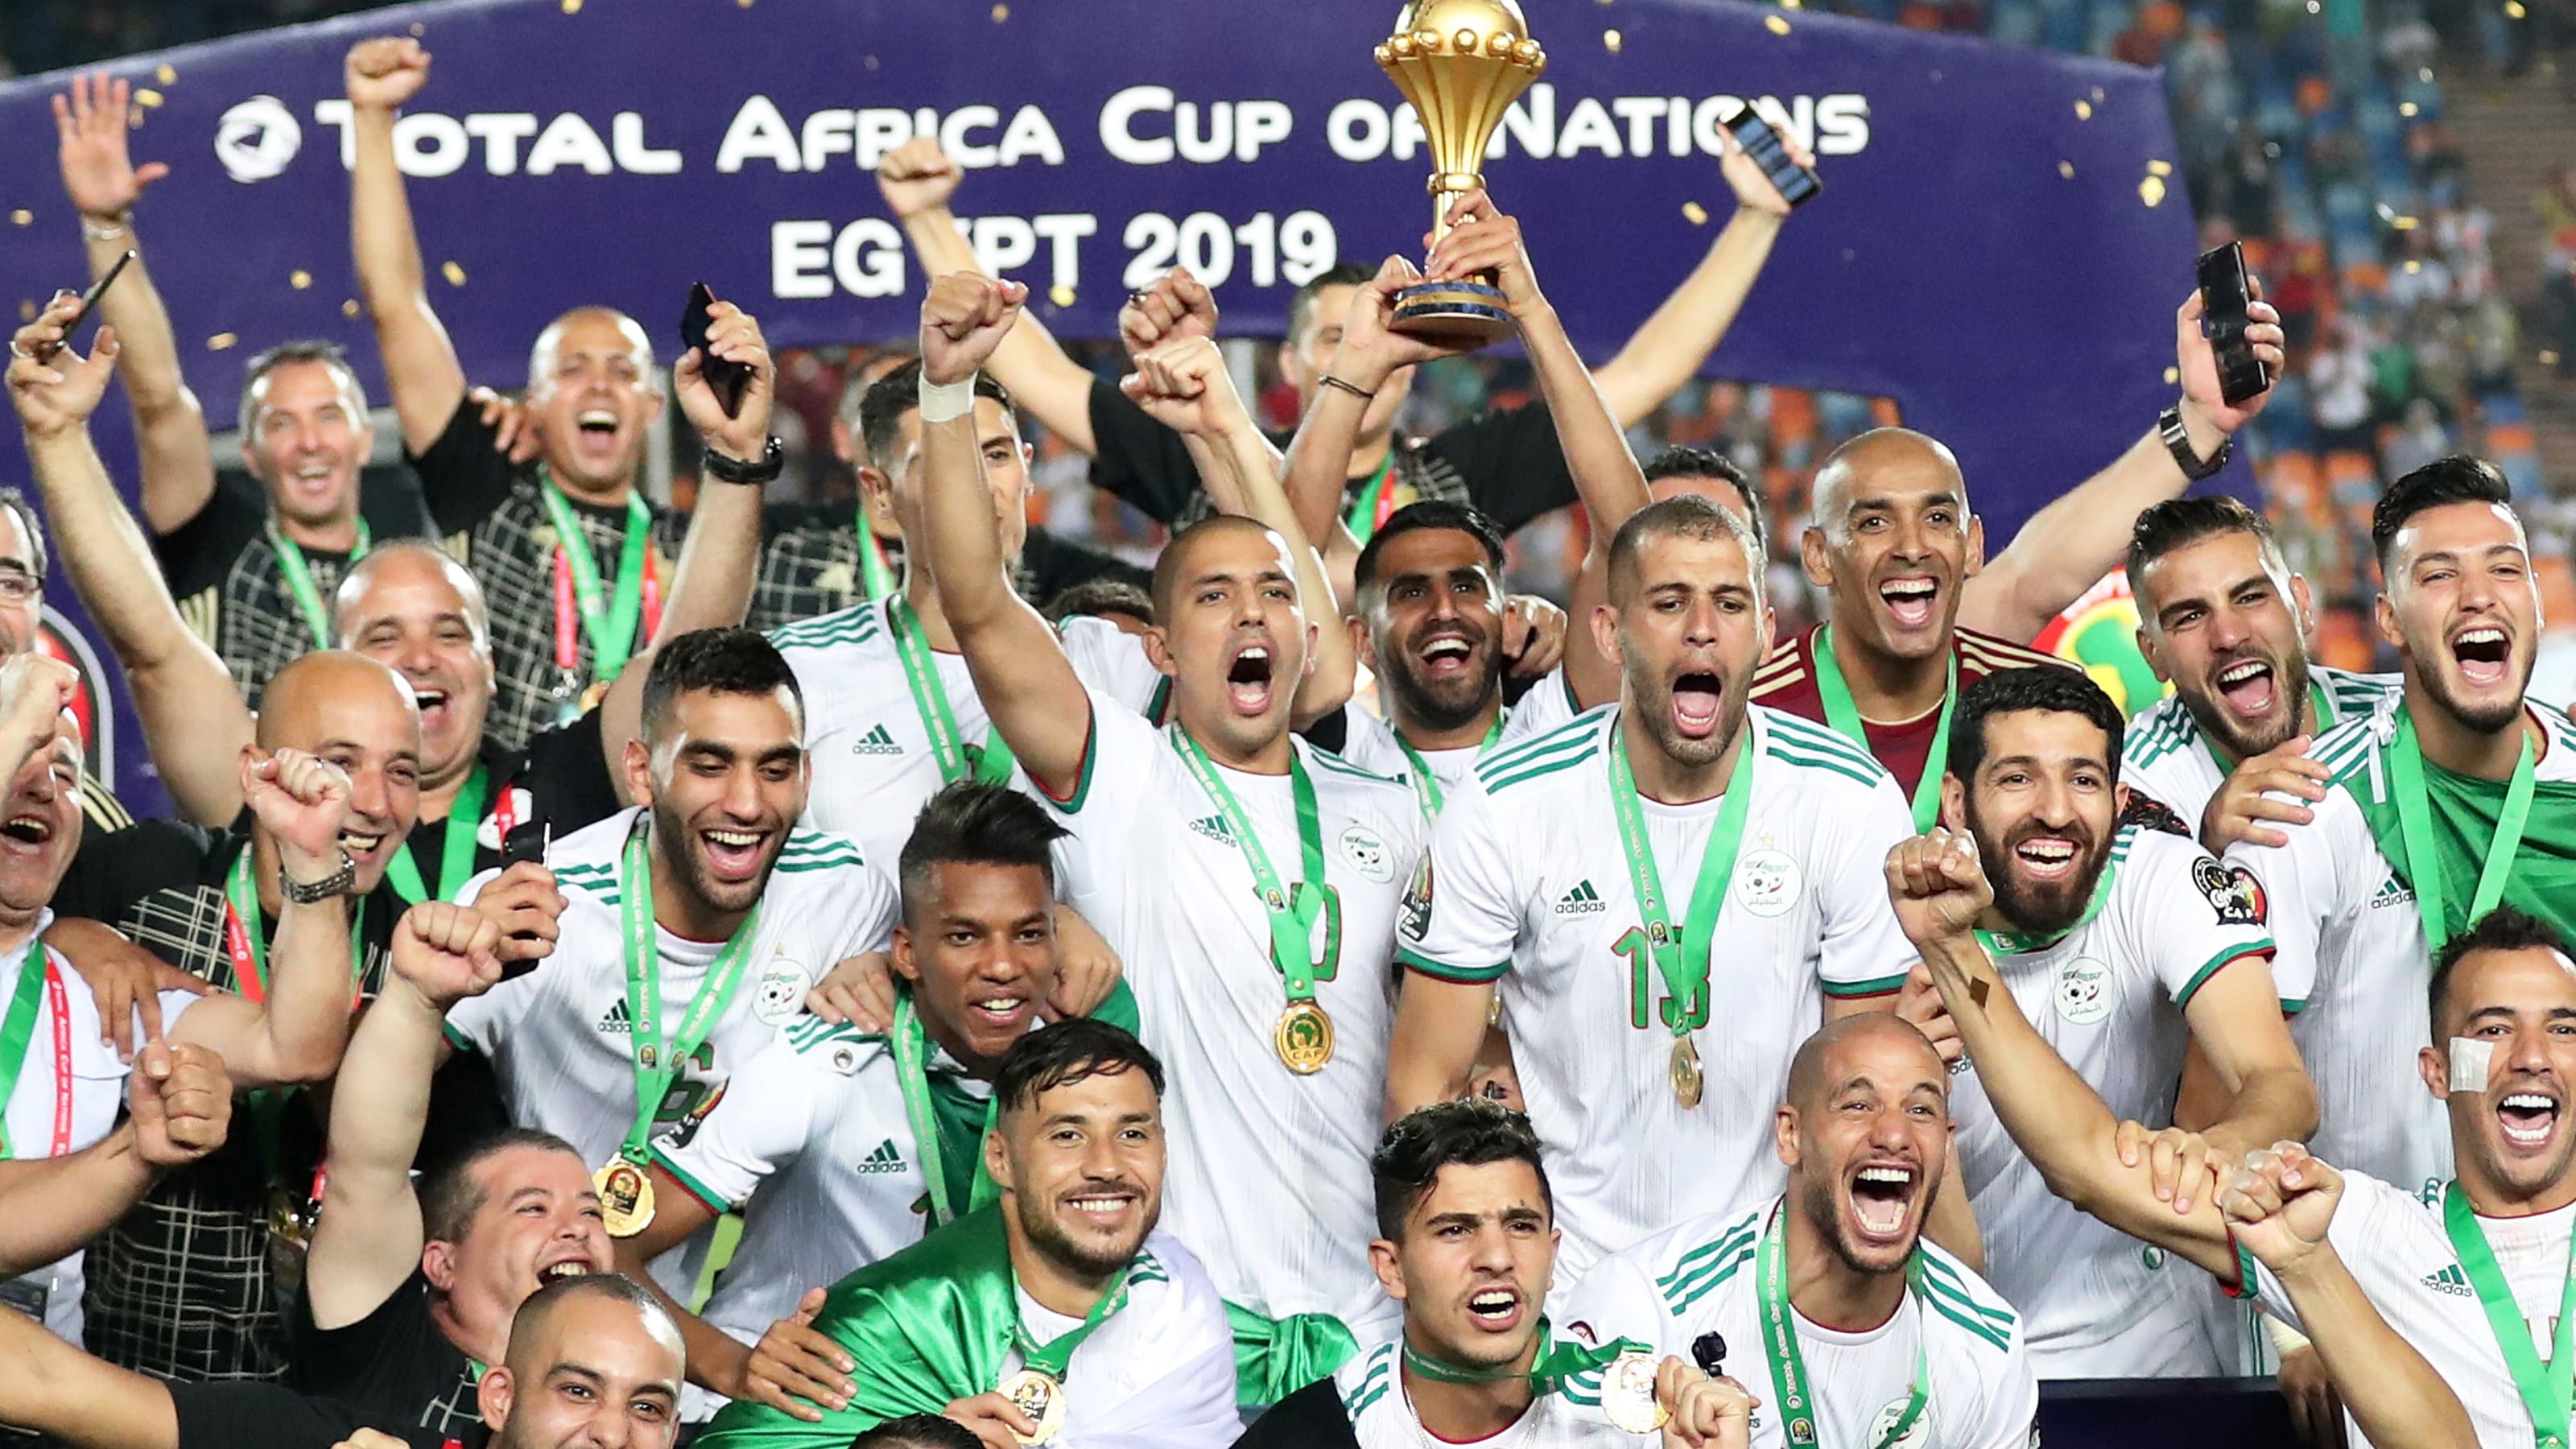 Africa cameroon in nations caf cup of 2021 Africa Cup